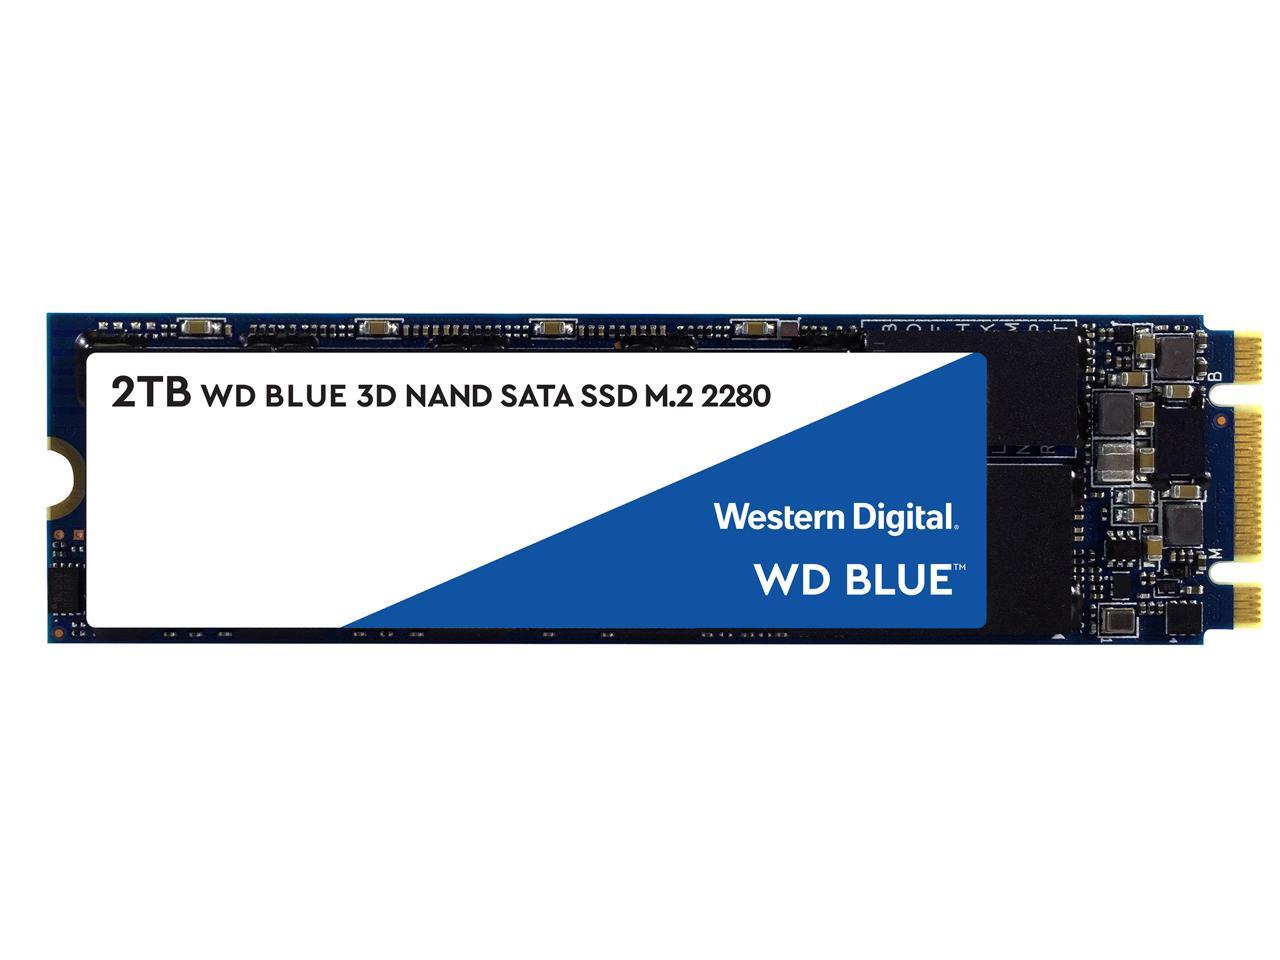 WD Blue 3D NAND 2TB Internal M.2 2280 Solid State Drive $117 shipped.